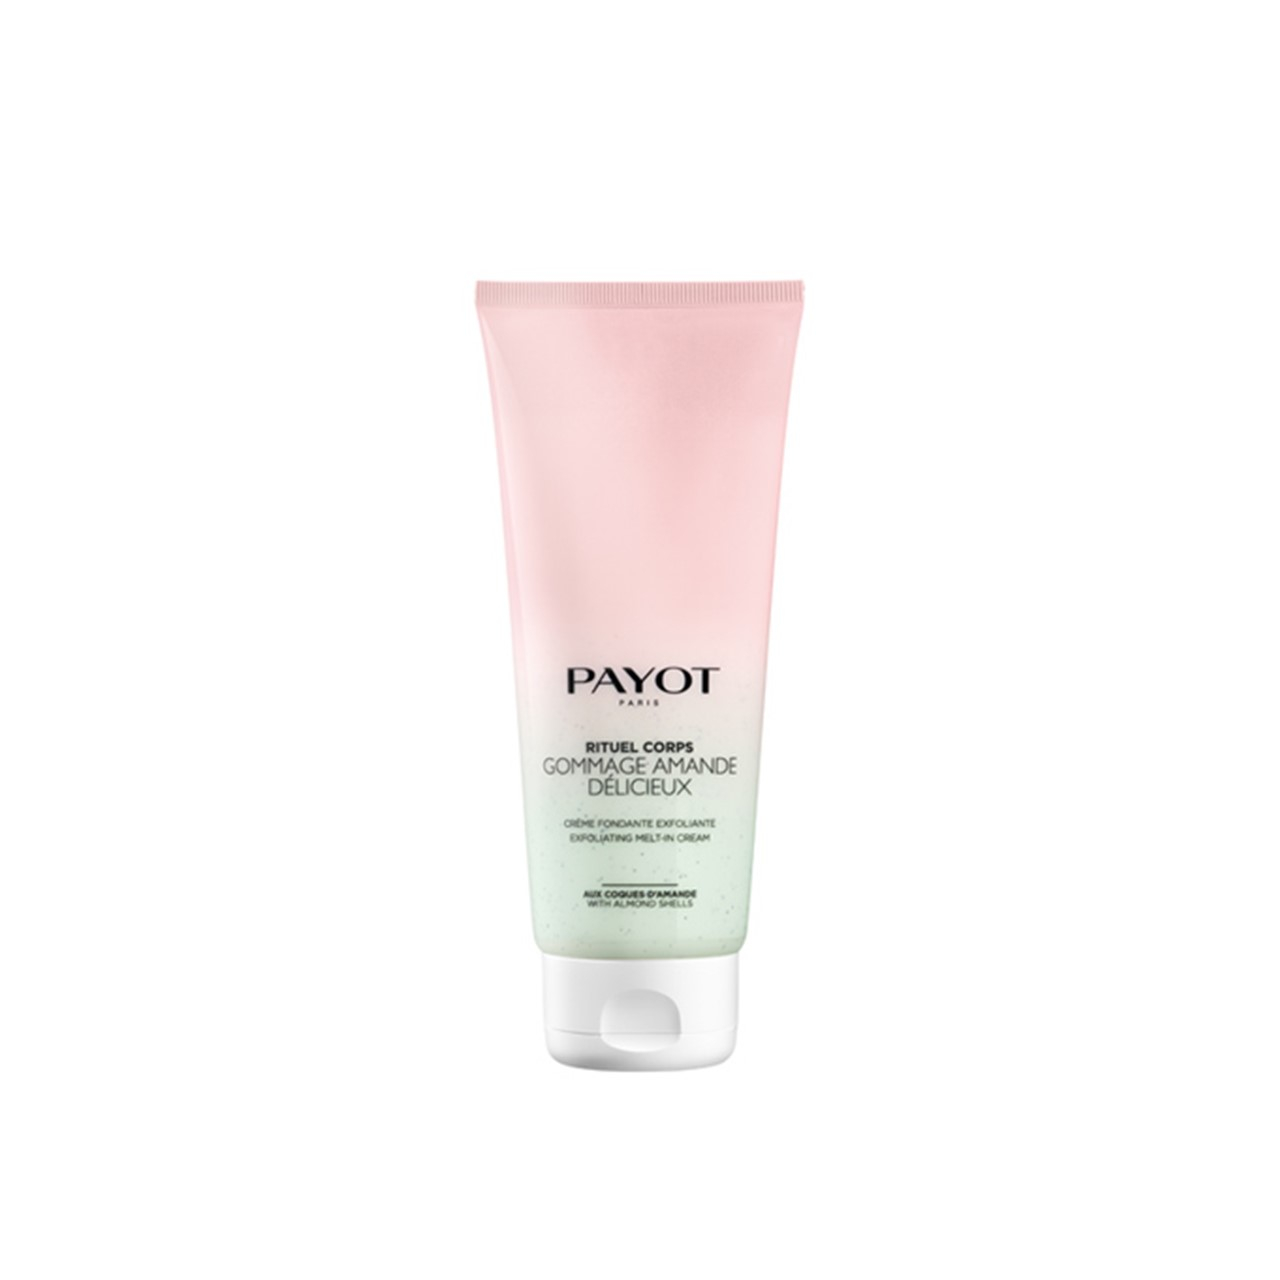 Payot Rituel Corps Gommage Amande Délicieux Exfoliating Cream 200ml